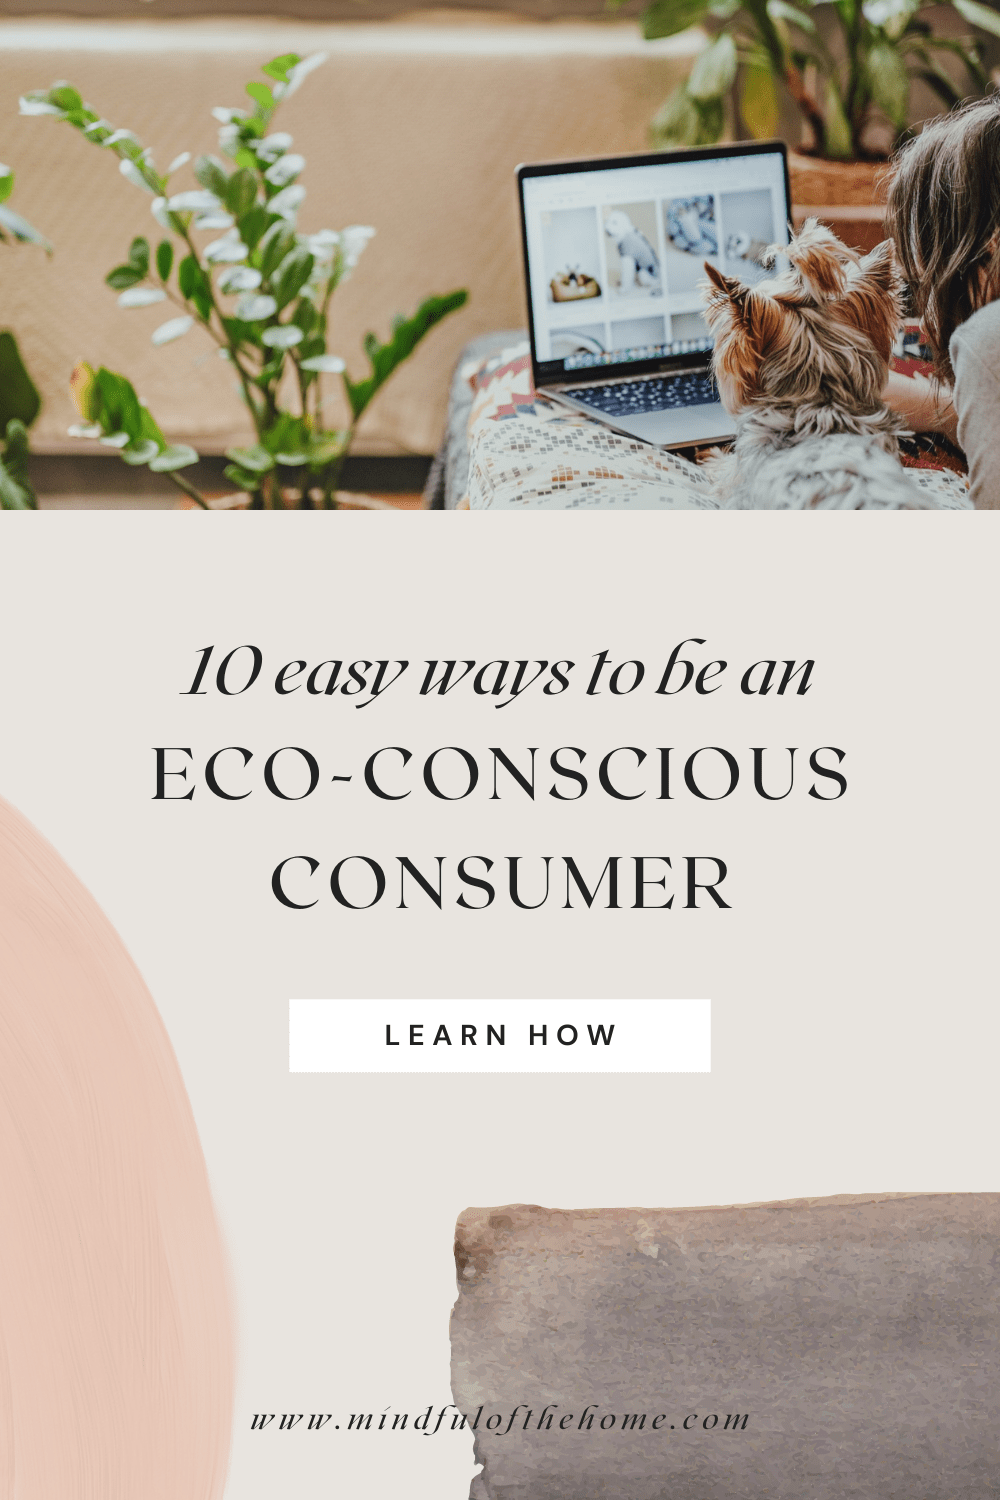 7 Tips to Appeal to the Eco-Conscious Consumer